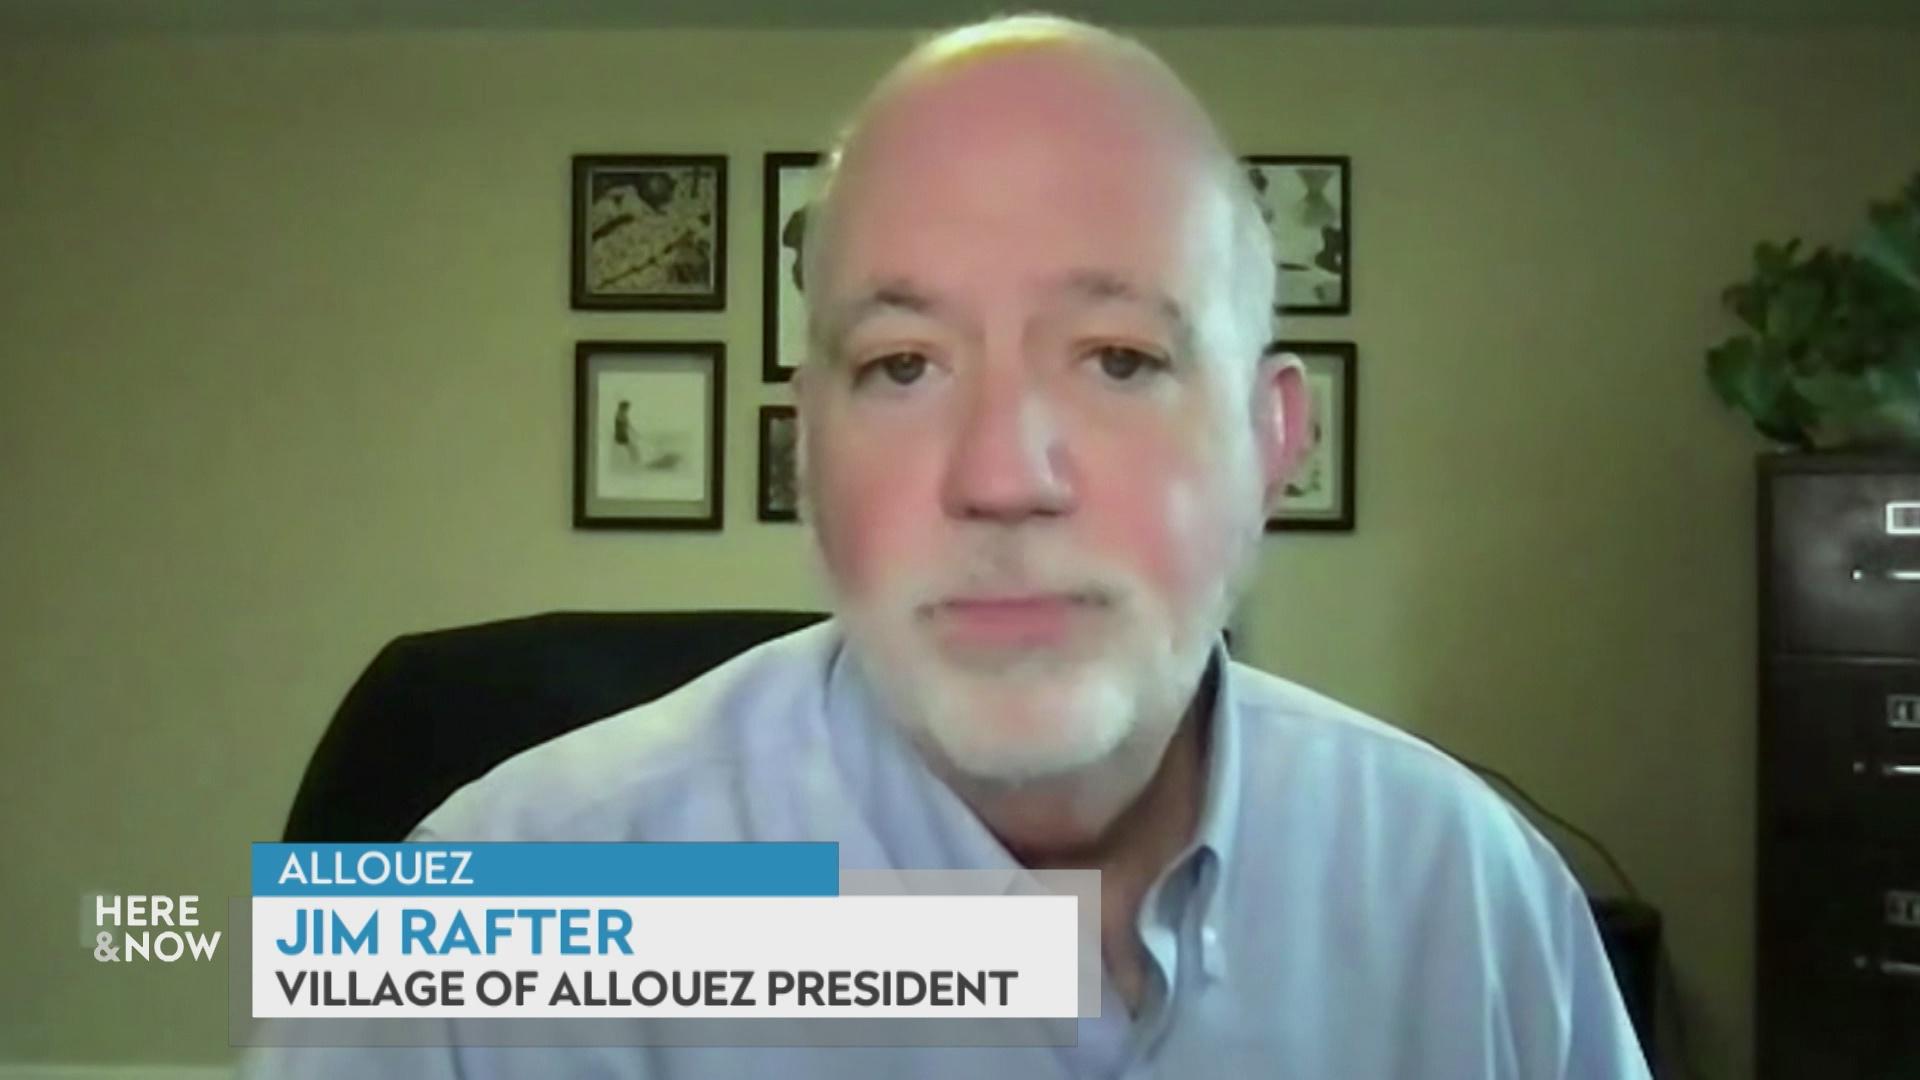 A still image from a video shows Jim Rafter seated in front of a blurred background with a graphic at bottom reading 'Allouez,' 'Jim Rafter' and 'Village of Allouez President.'